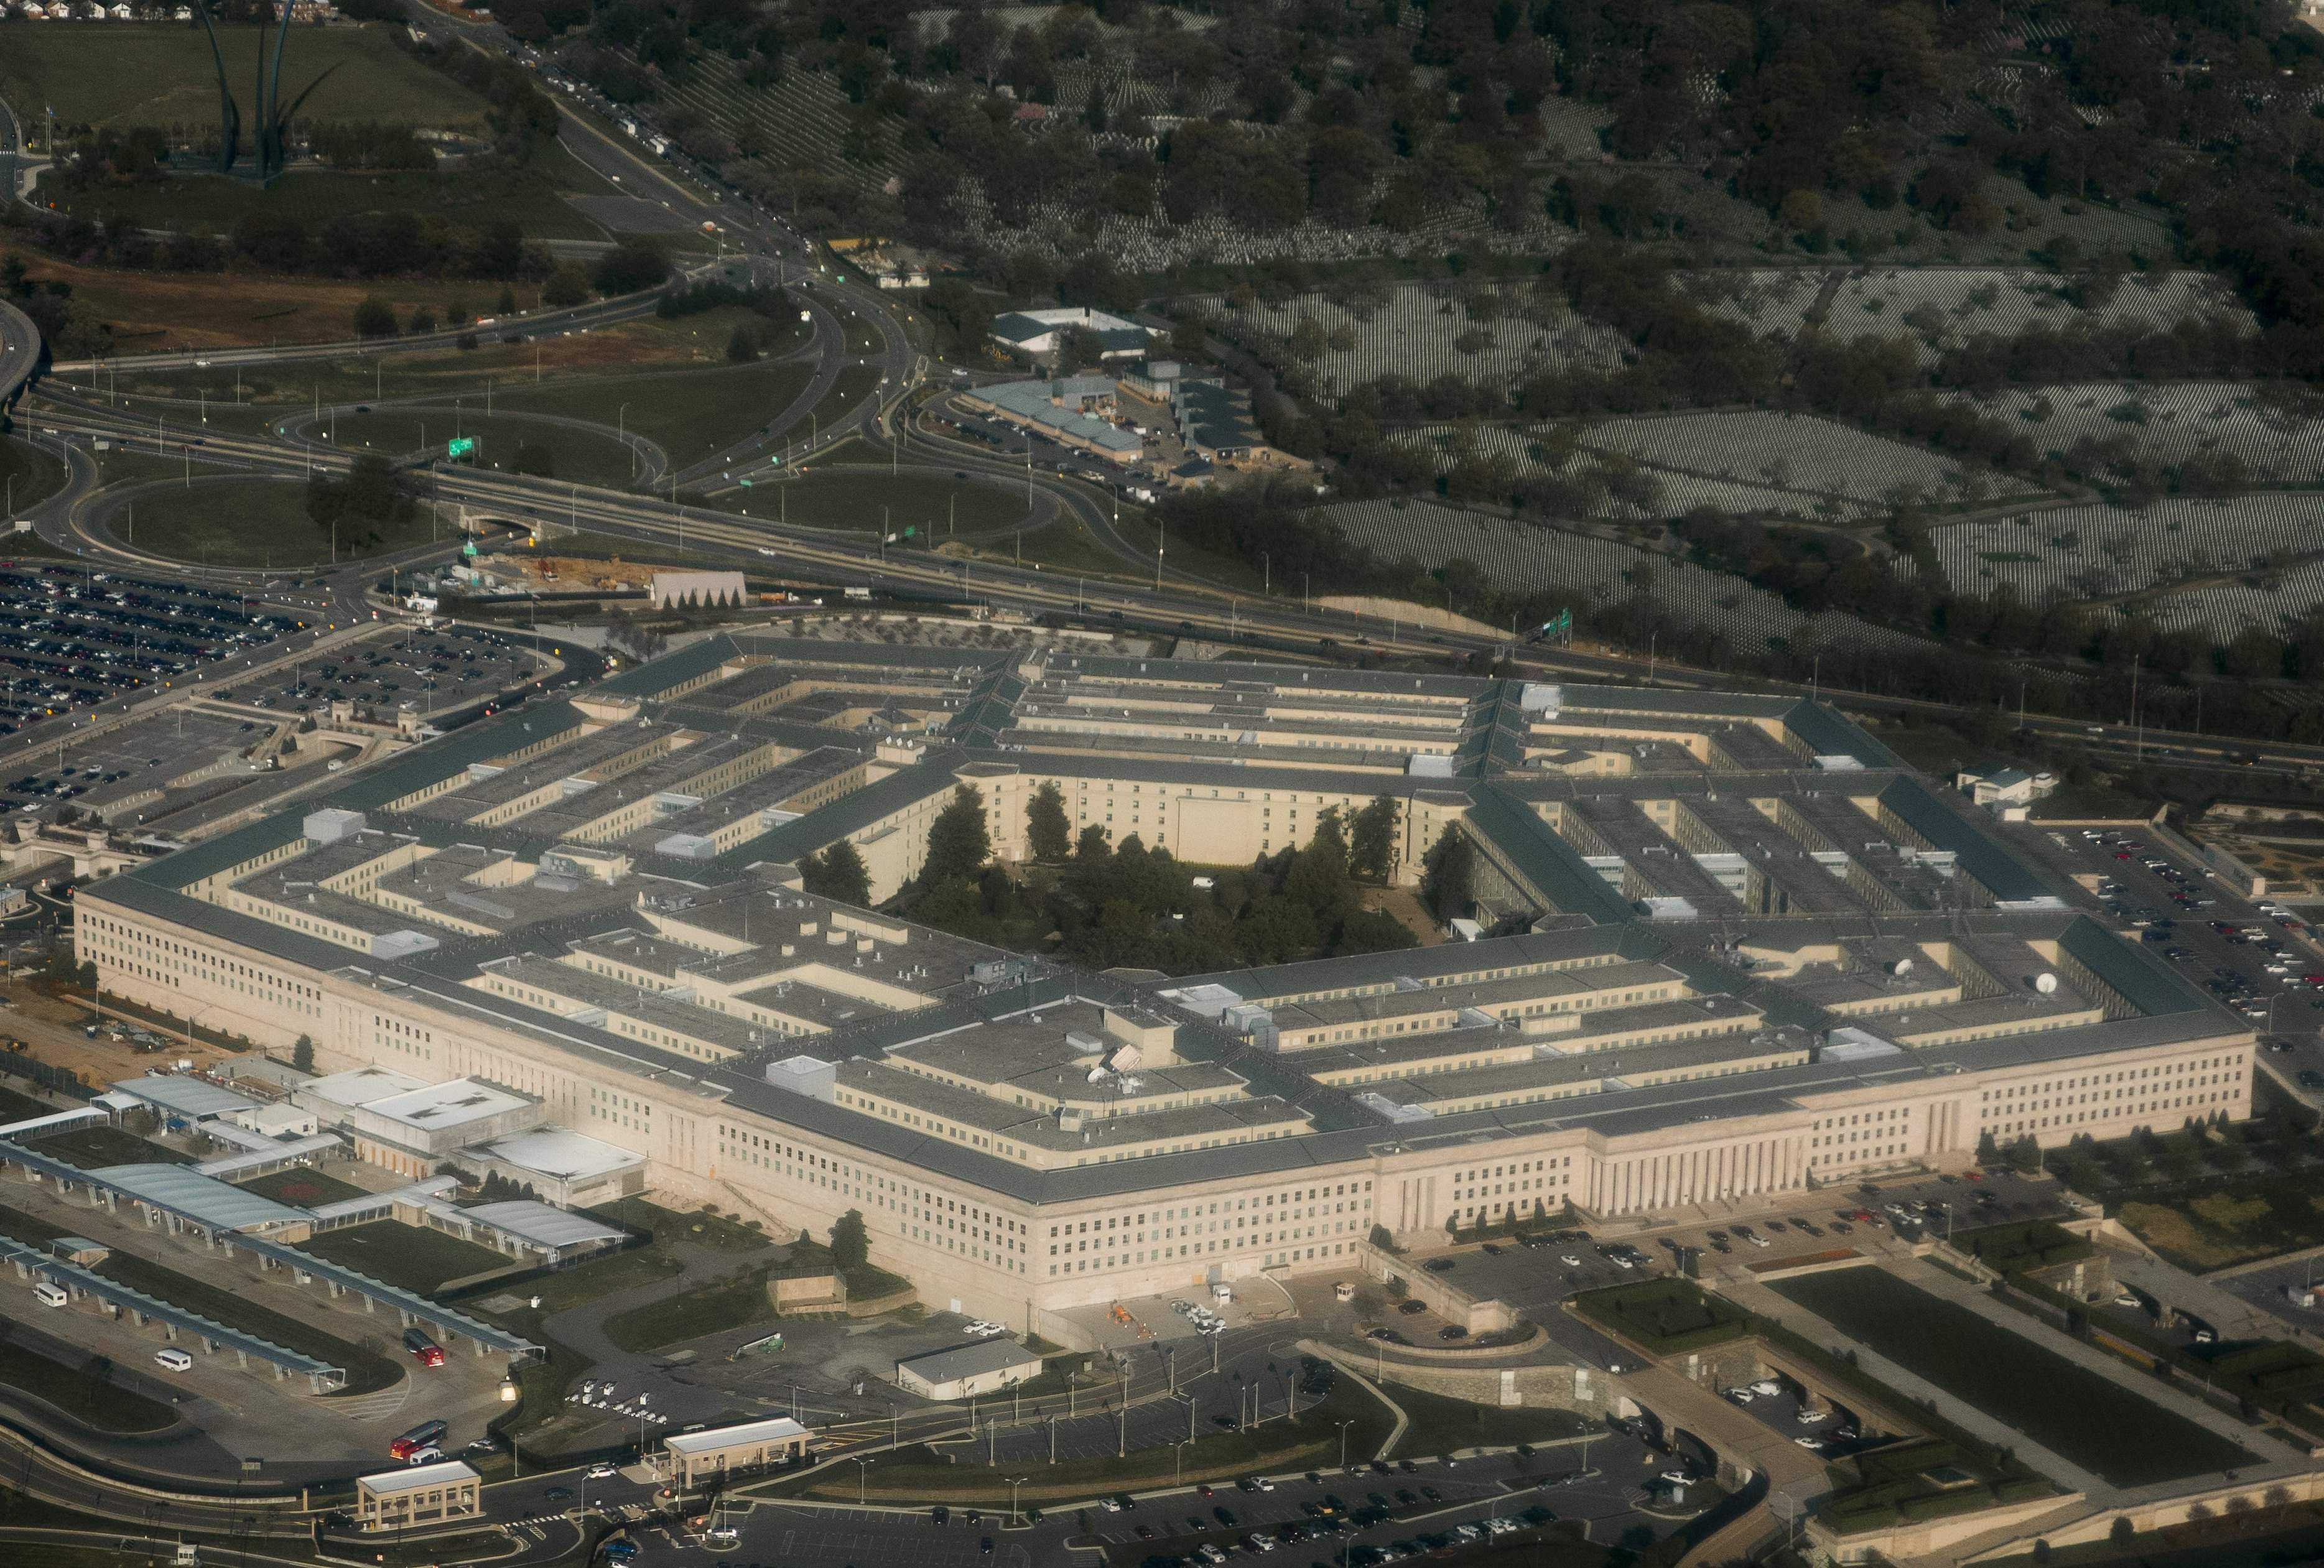 The Pentagon is viewed outside Washington, DC. (AF Photo)